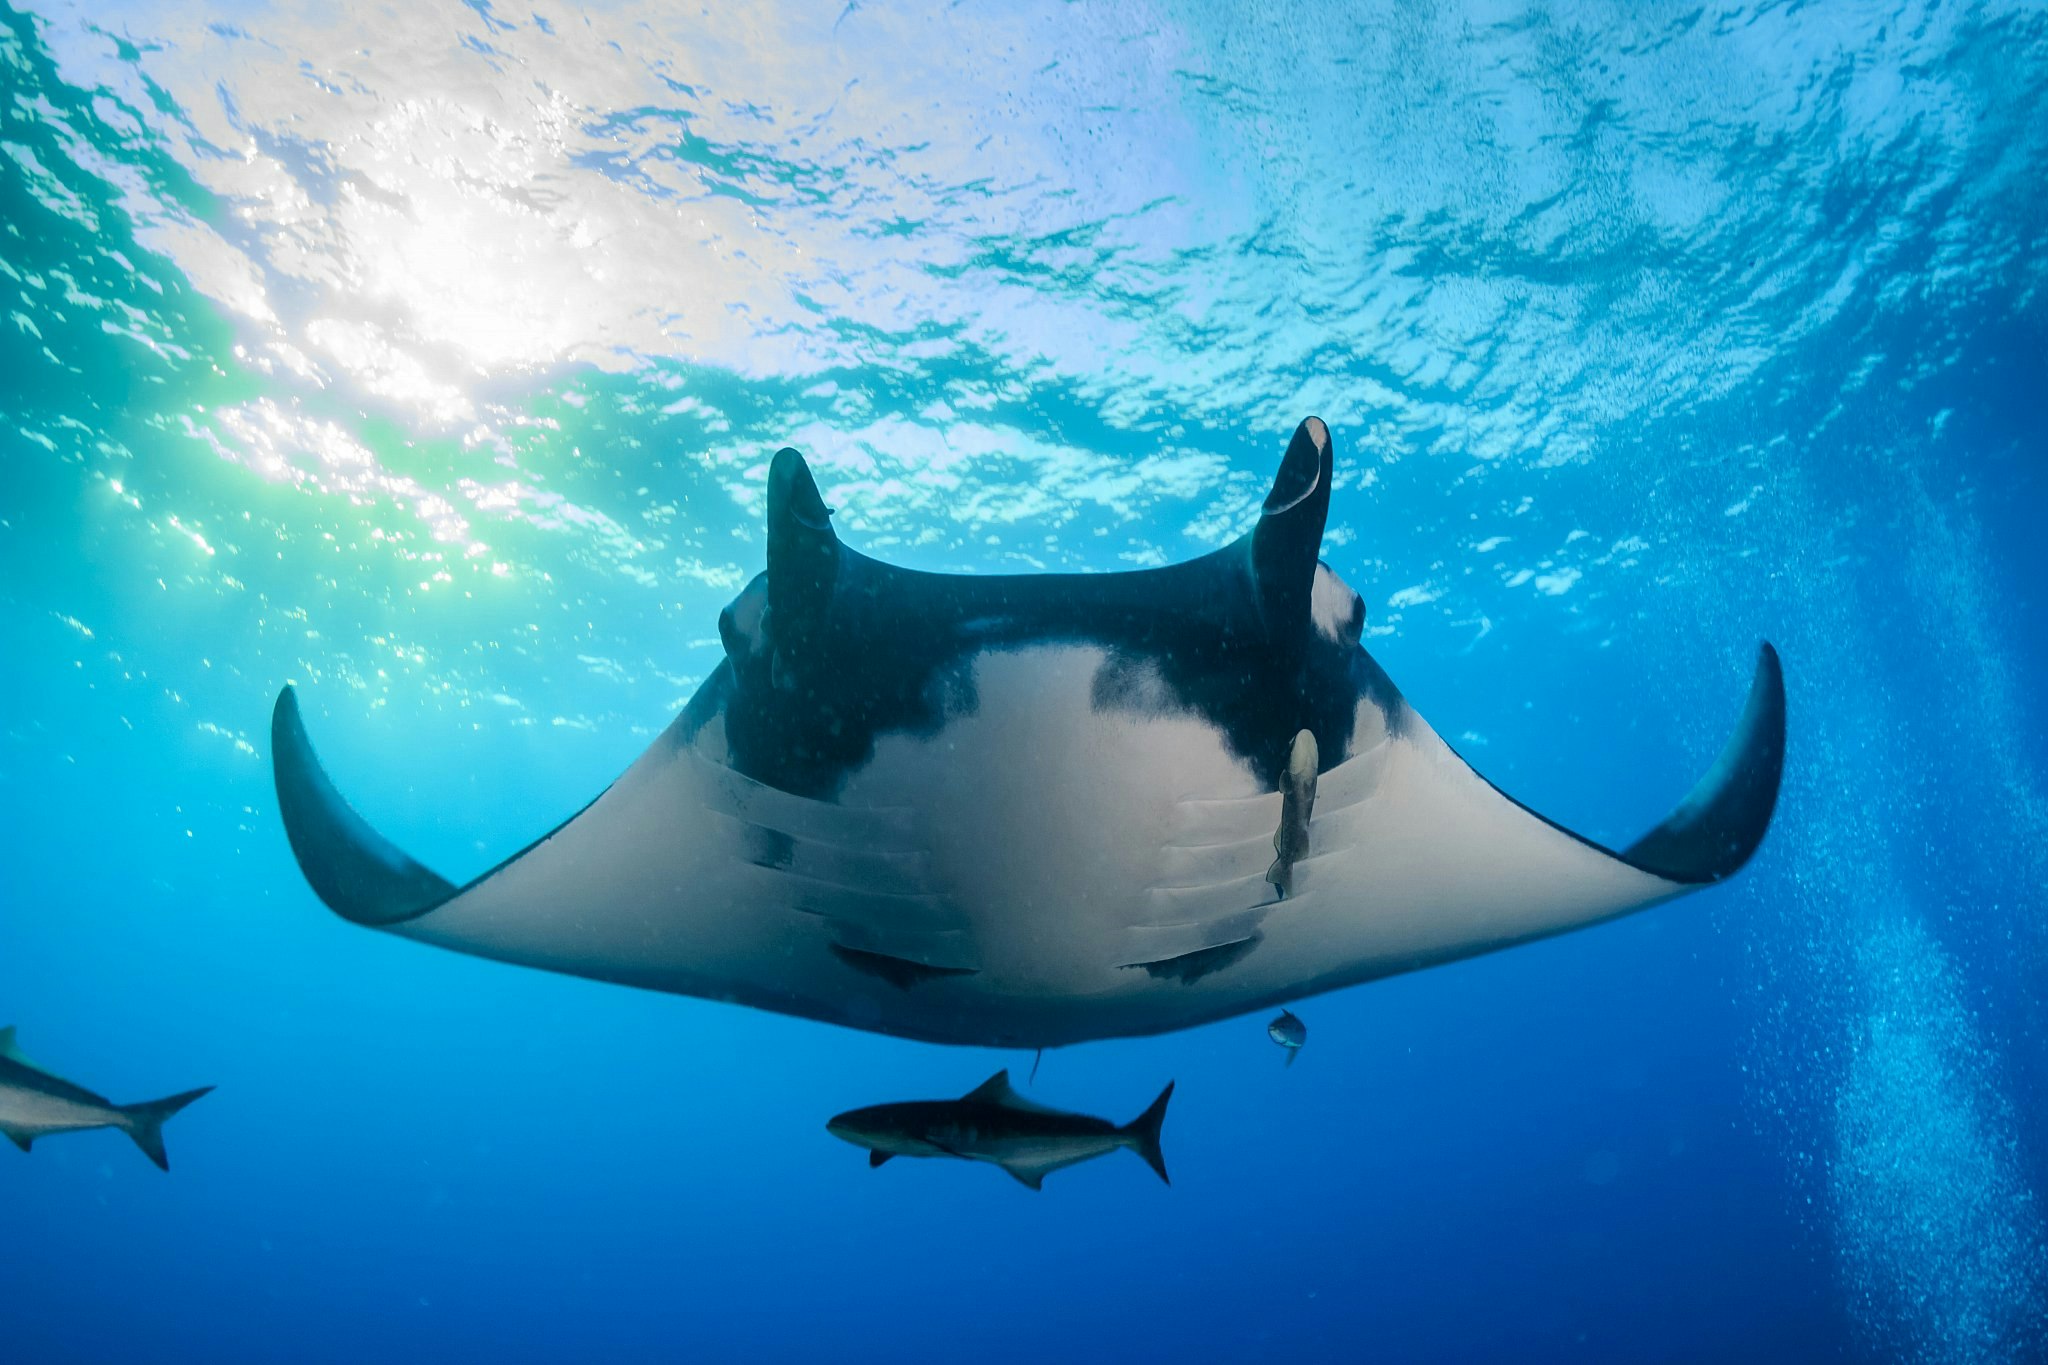 A manta ray swimming amid cobia and other fish in blue water.